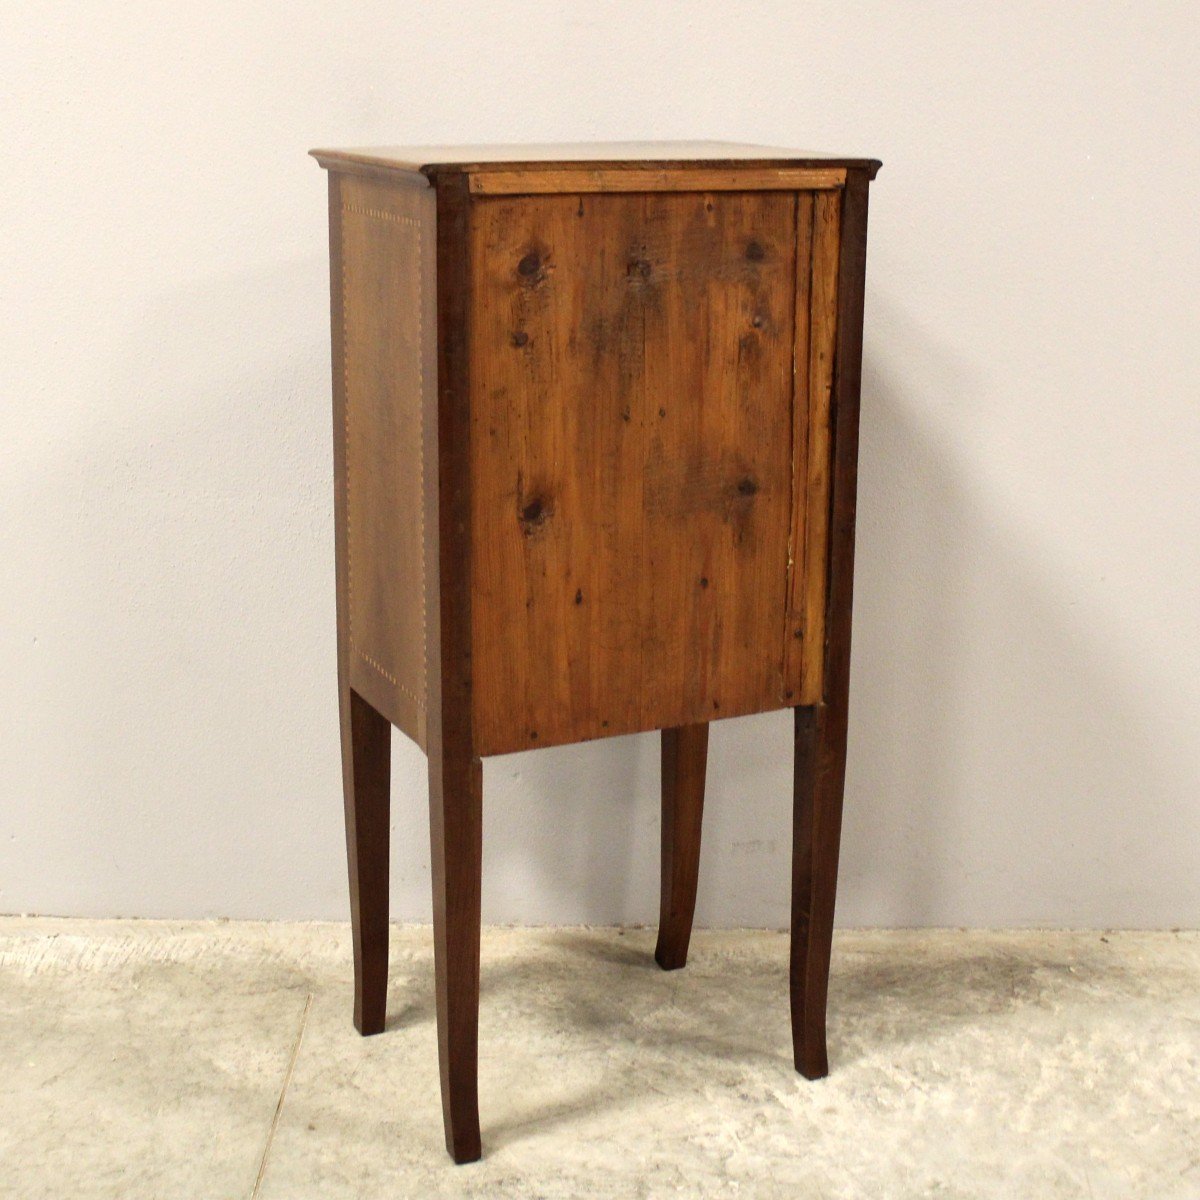 Antique Directoire Bedside Nightstand Table In Walnut And Marquetry - Italy 19th-photo-8